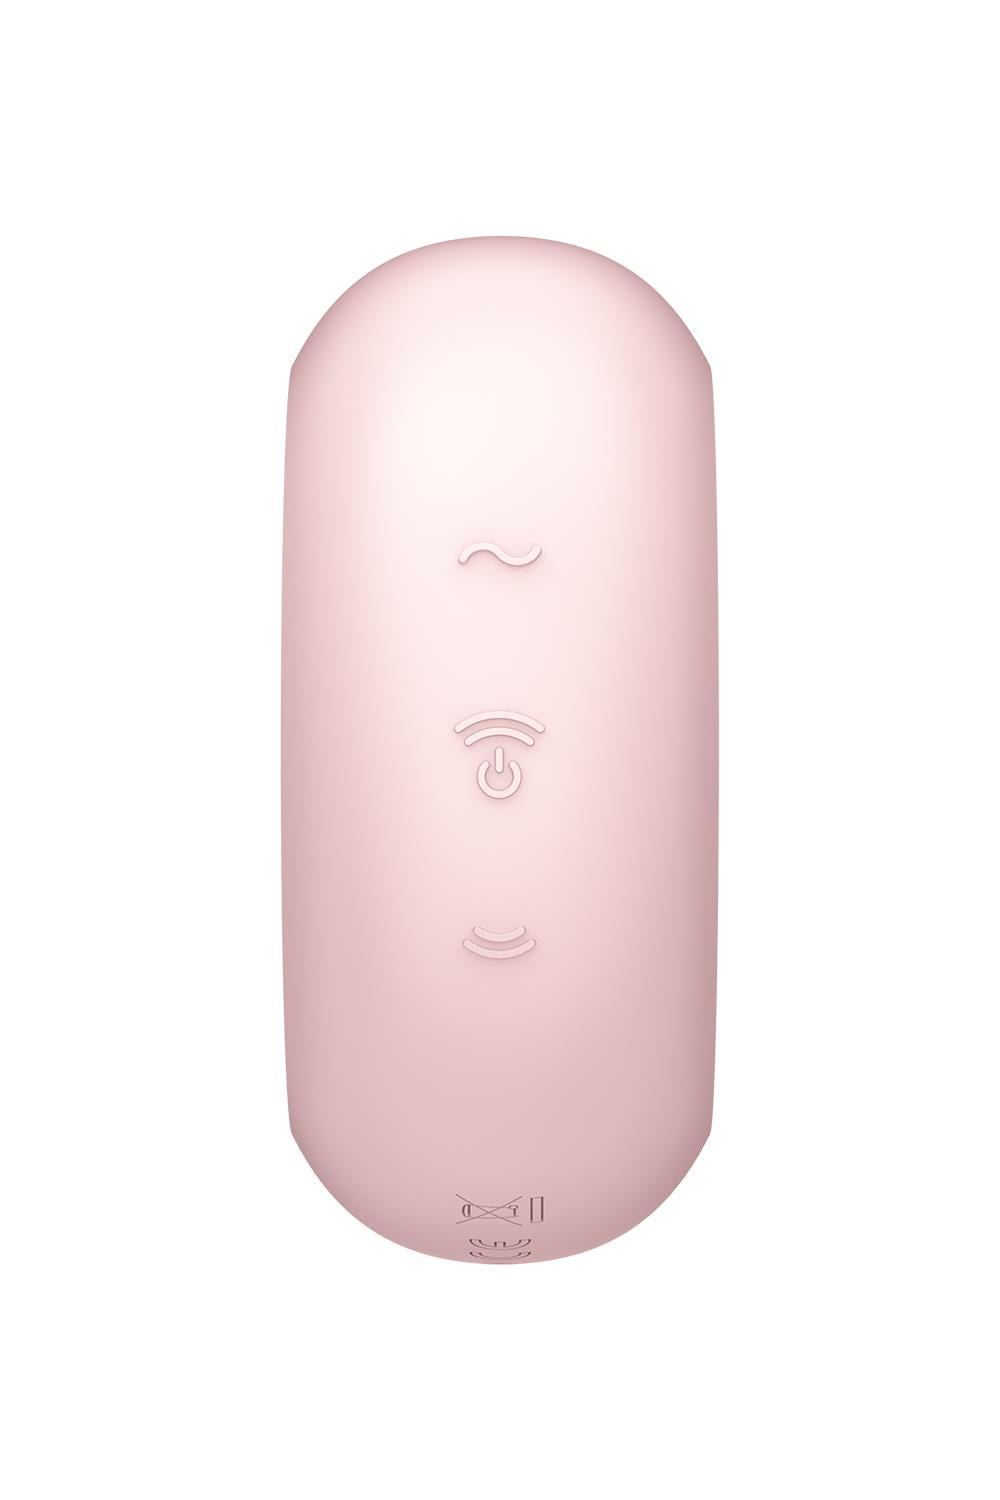 Satisfyer - Pro to go 3 - Air Pulse Vibrator